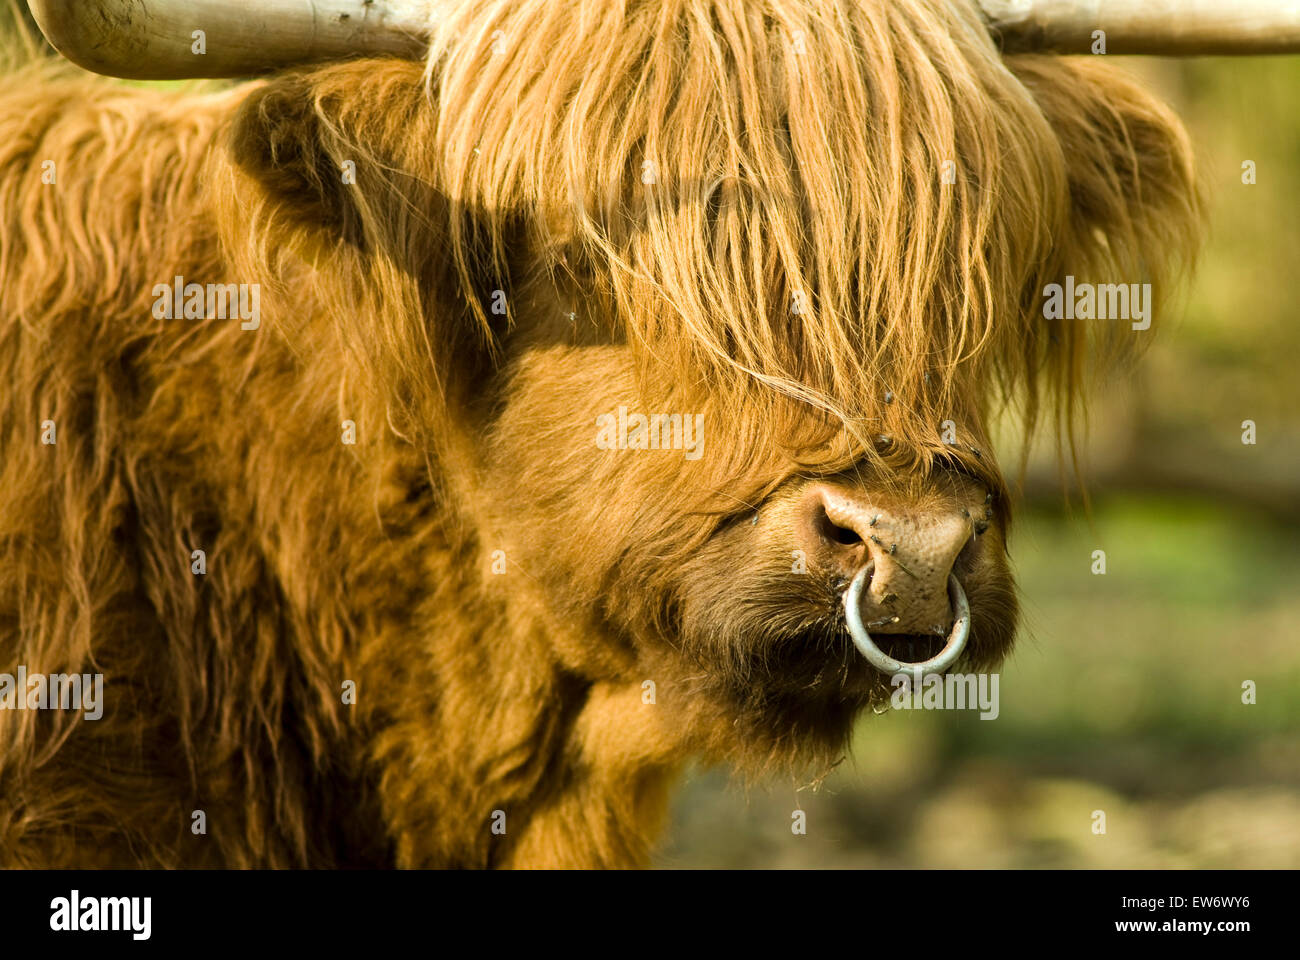 Scotland highland cattle with nose ring portrait Stock Photo